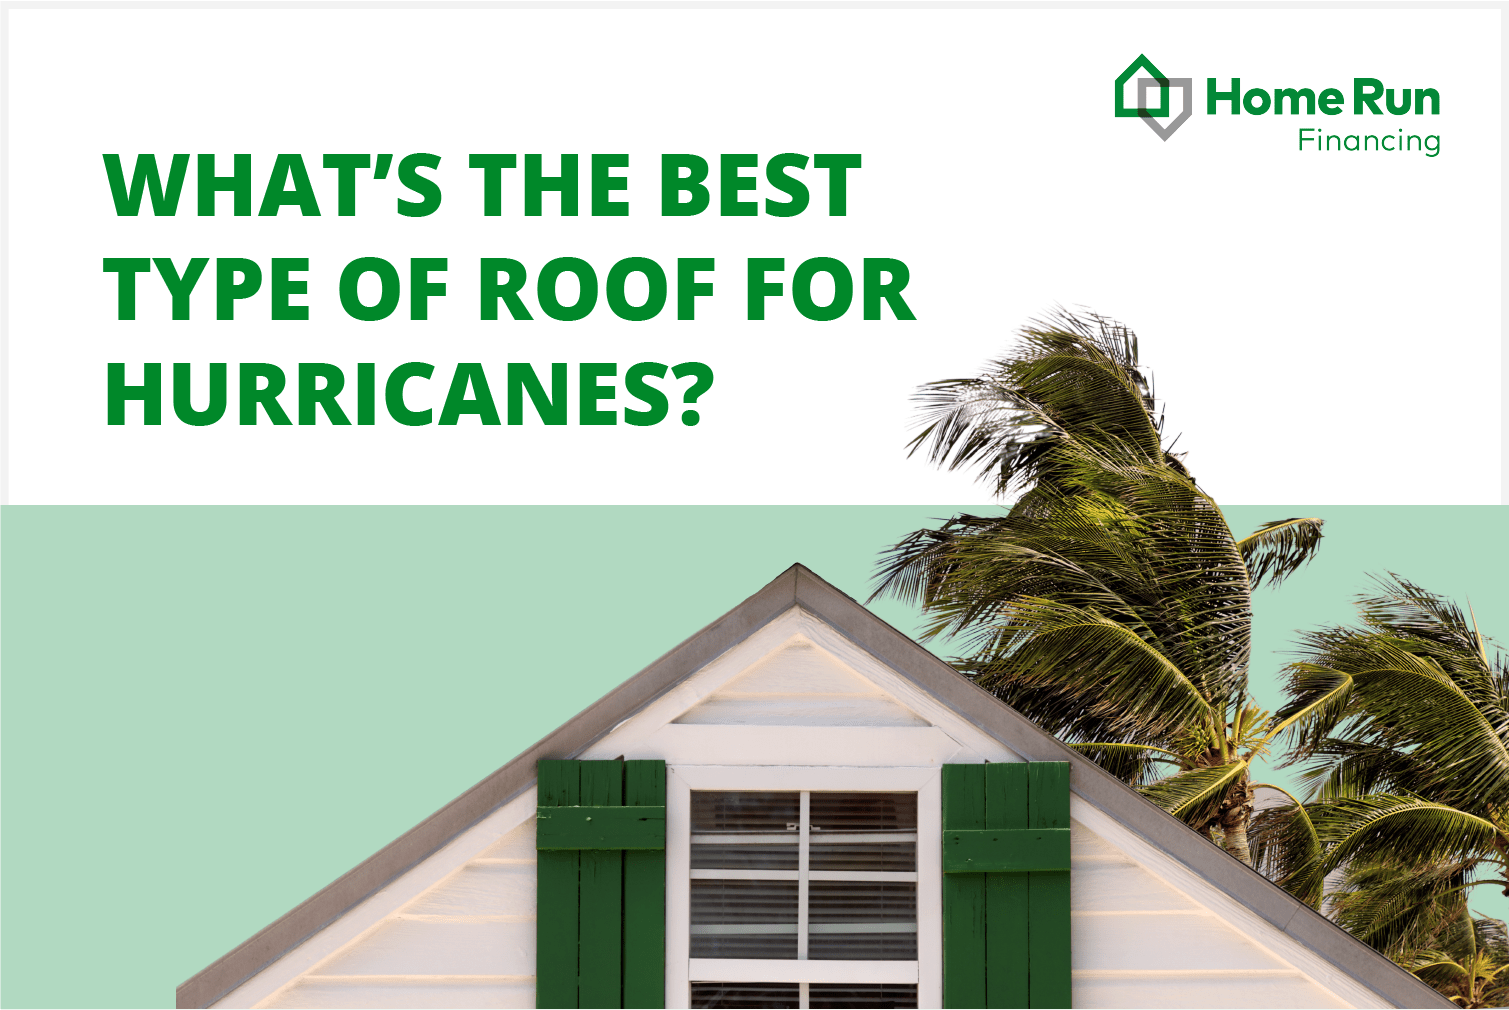 What’s the best type of roof for hurricanes?